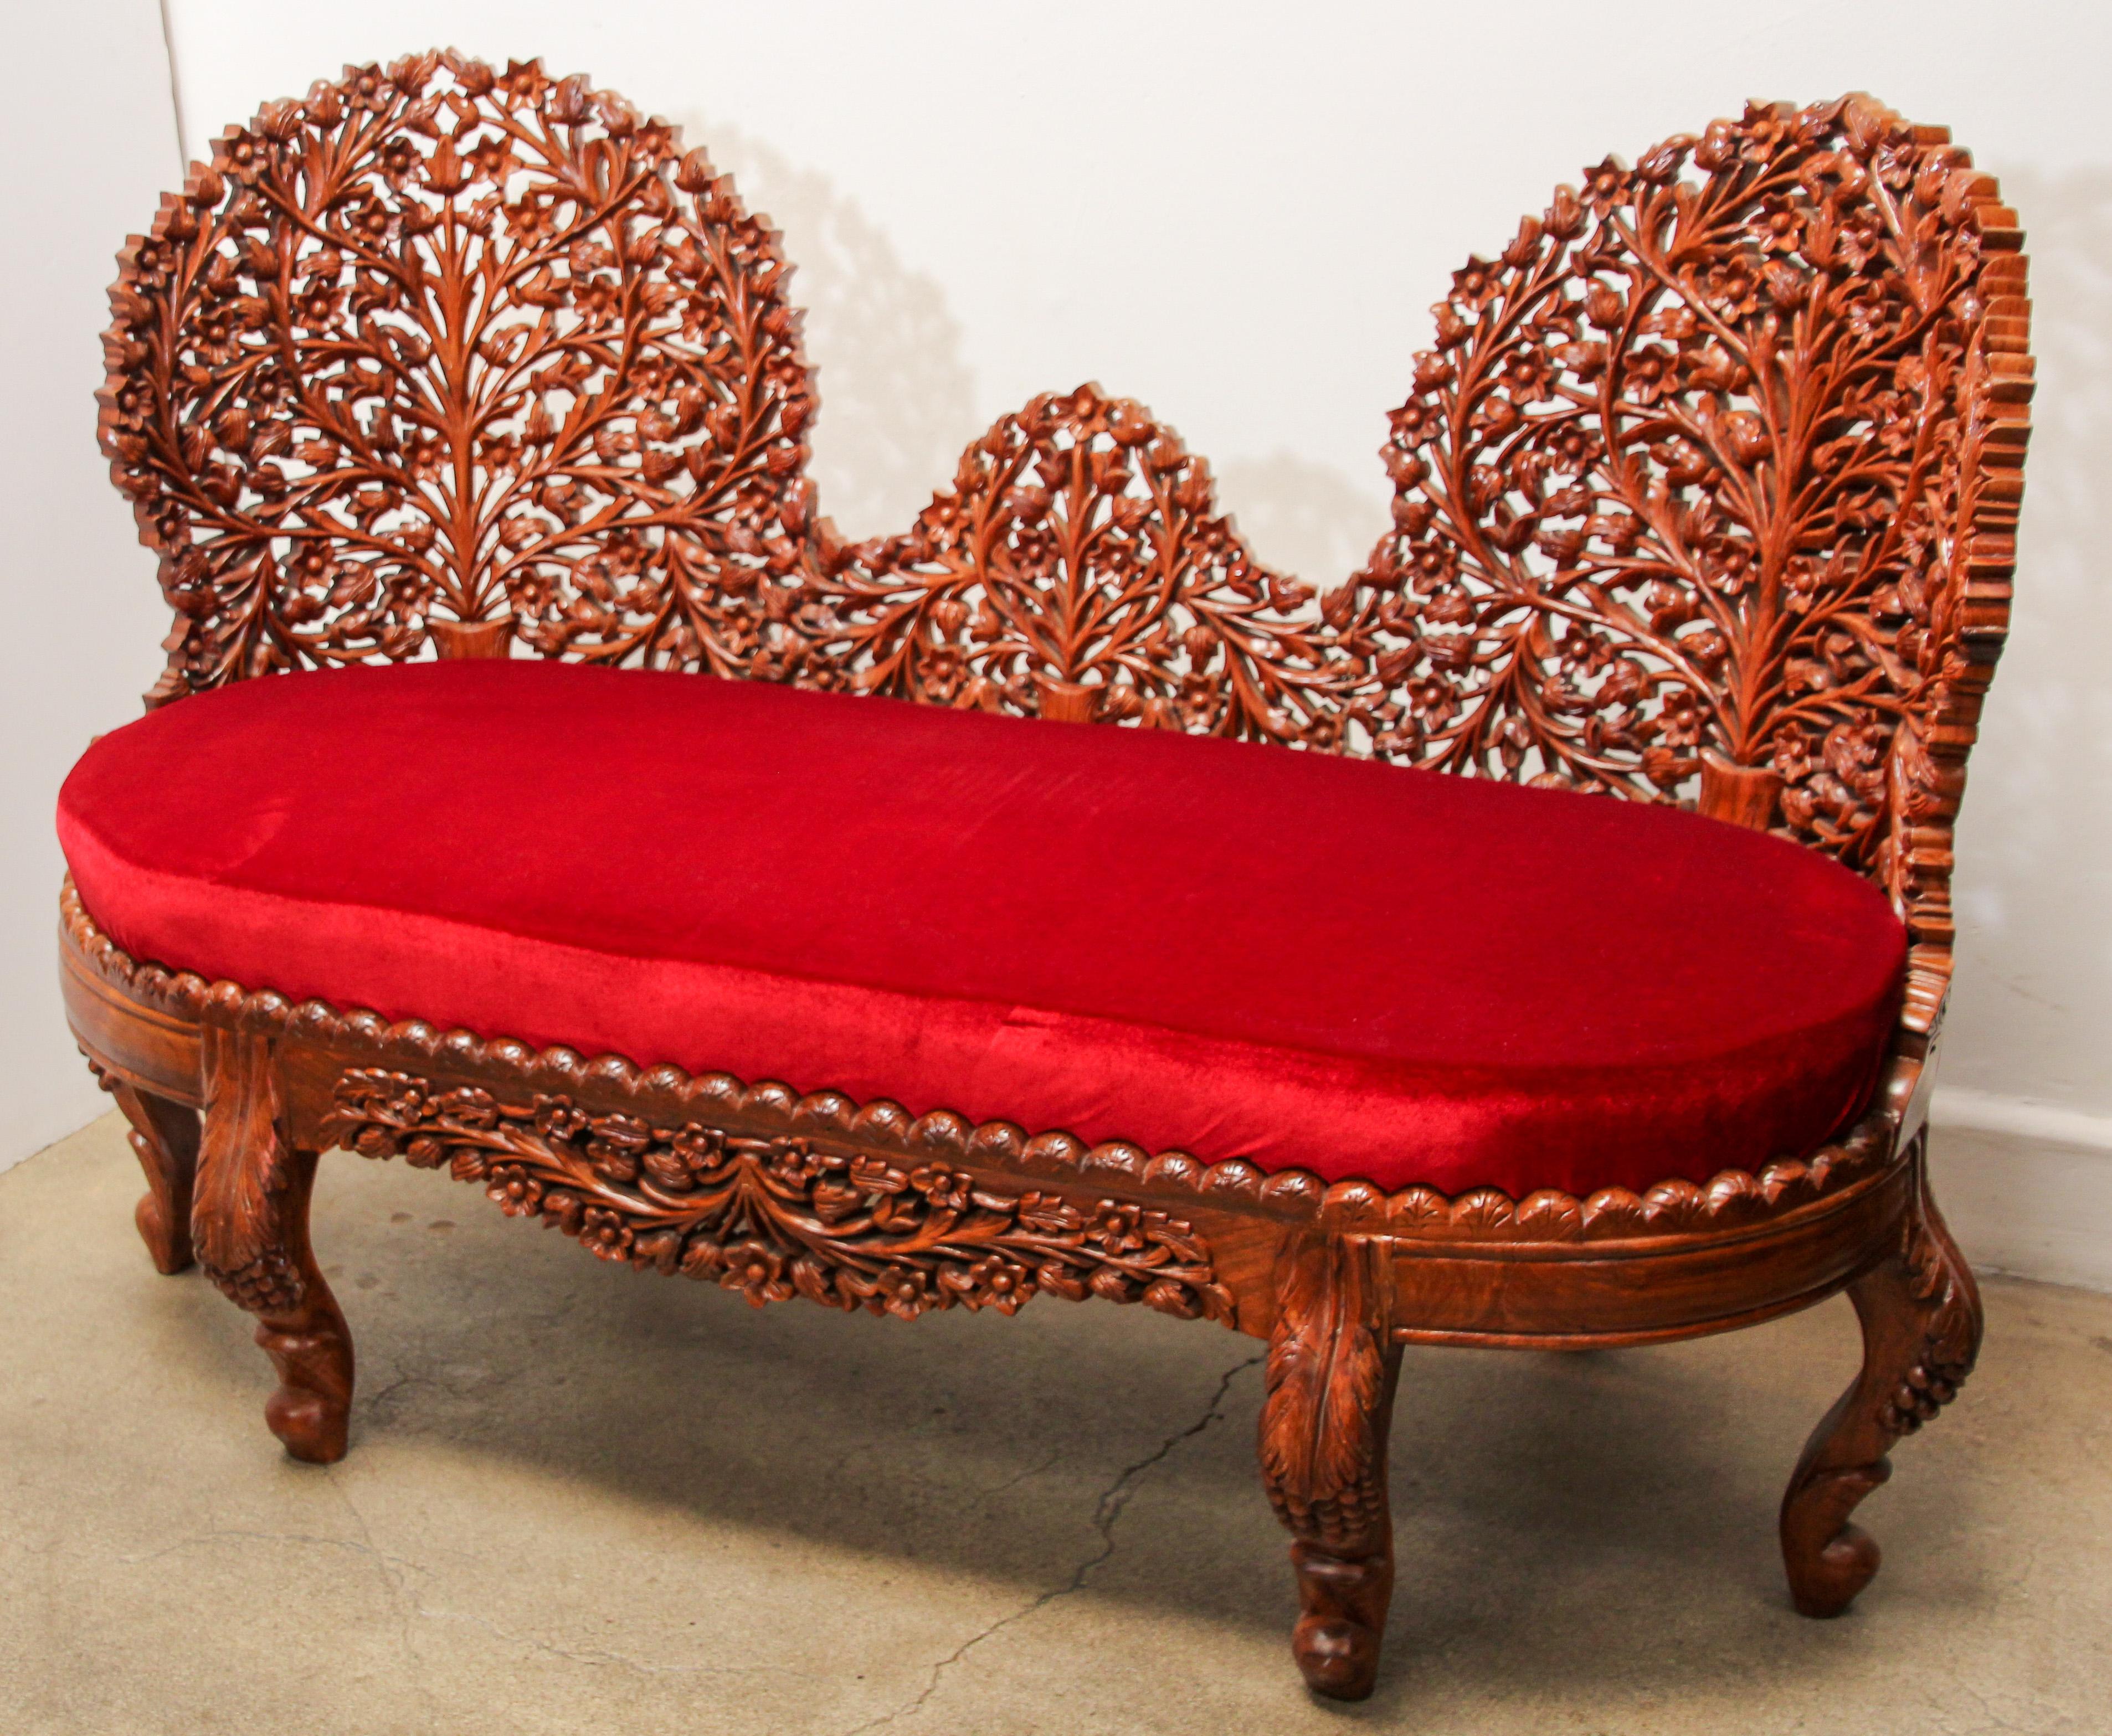 Anglo-Raj contemporary settee with foliate open carved wood back and carved legs.
Intricately detailed.
From Rajasthan, India.
Newly upholstered sofas with deep red velvet fabric.
Settee size:
Back 38